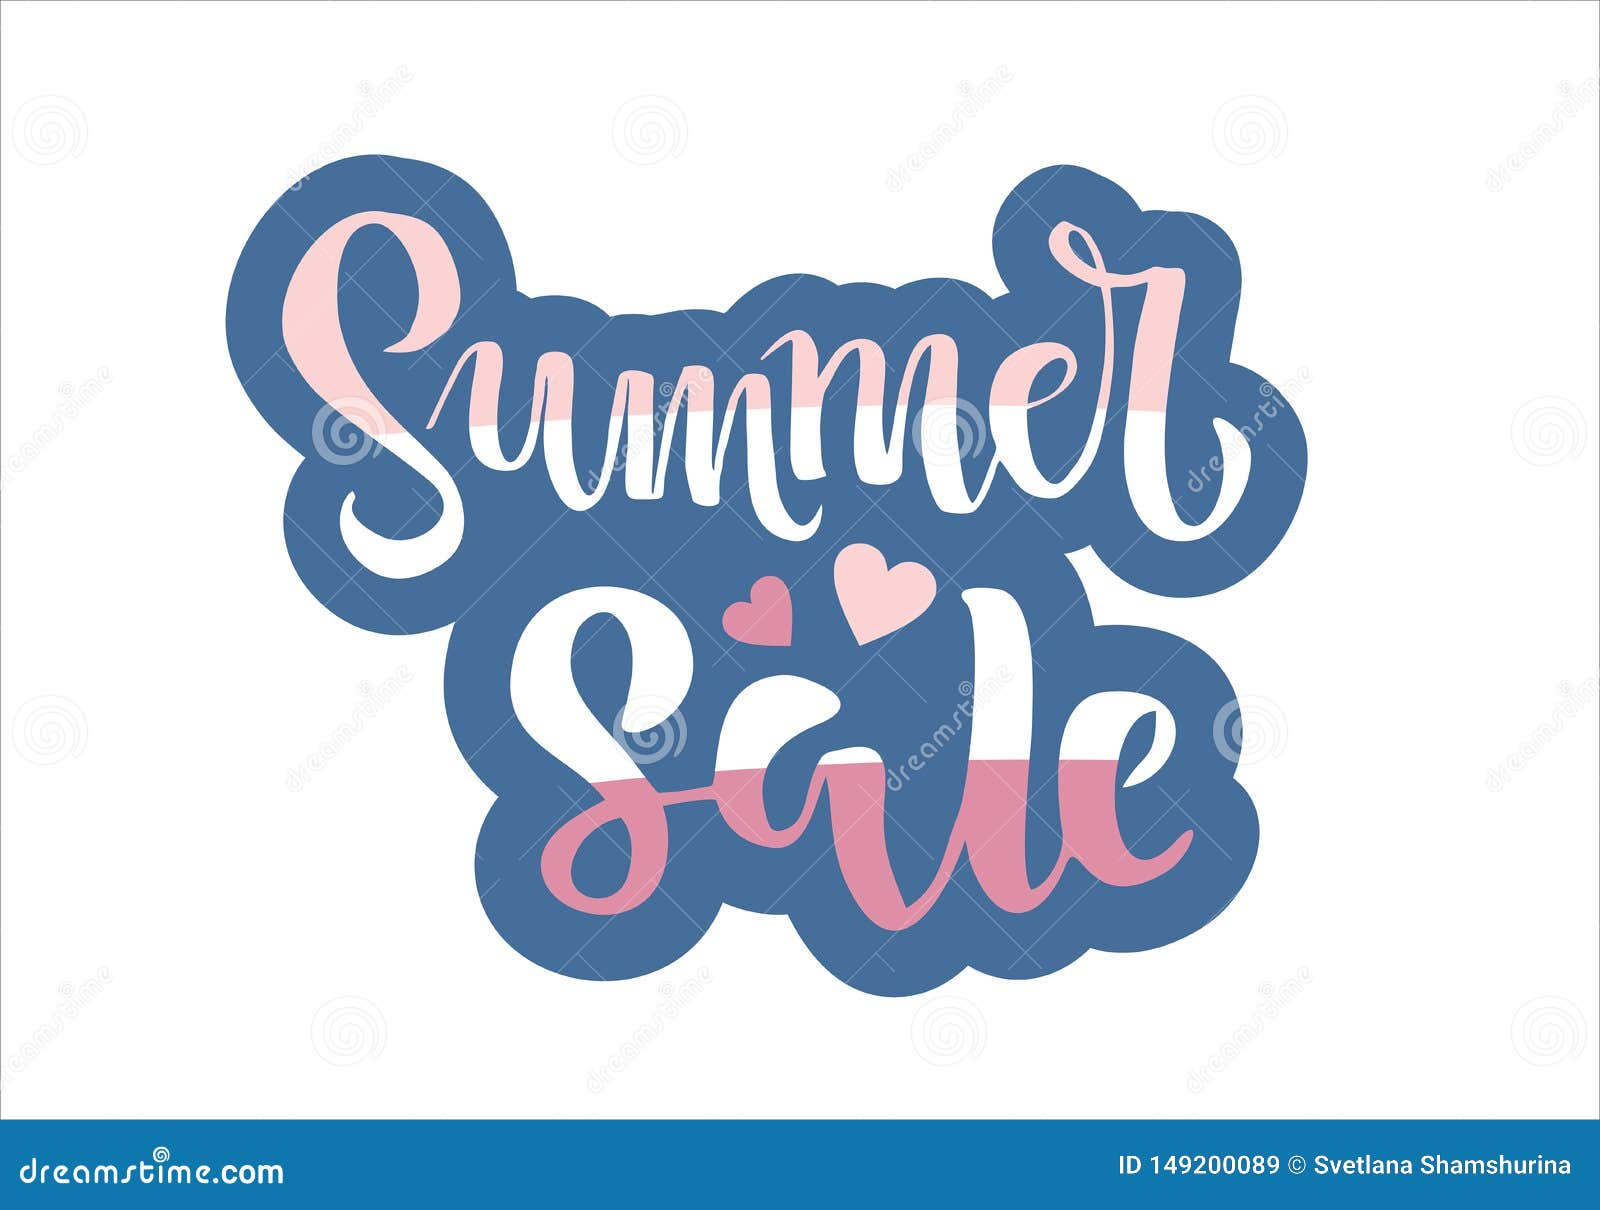 Summer sale lettering Handwritten modern calligraphy, brush painted letters with two hearts. Inspirational text in vector illustration. Template for flyer, banner, poster, greeting card, web design